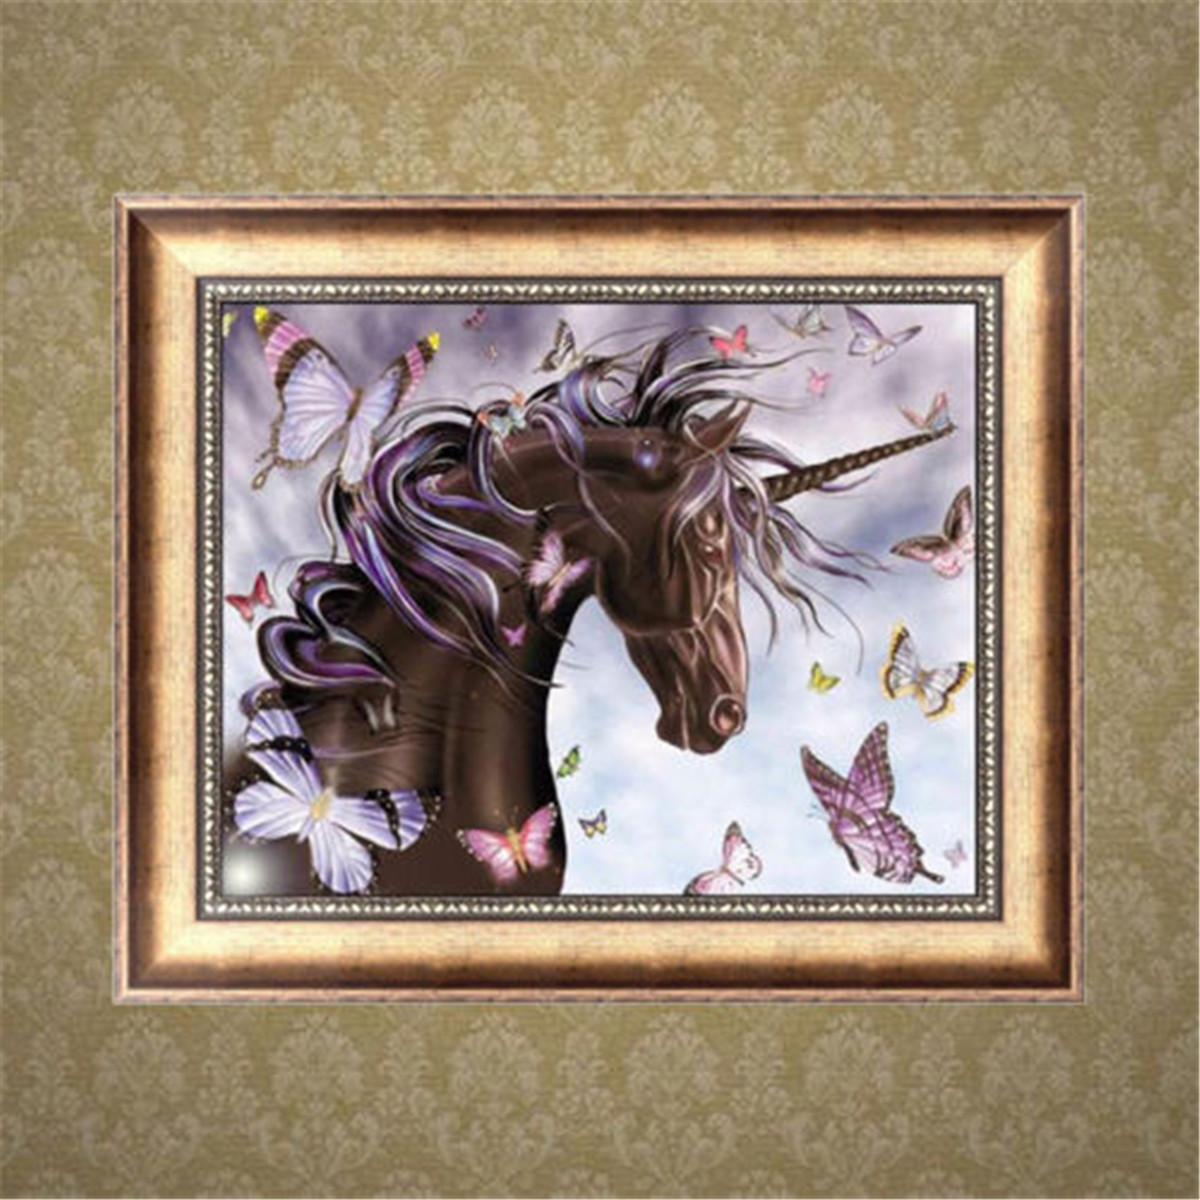 Horse-Butterfly-5D-Diamond-Embroidery-Painting-Cross-Stitch-DIY-Painting-Tools-Handmade-Wall-Decorat-1747742-1